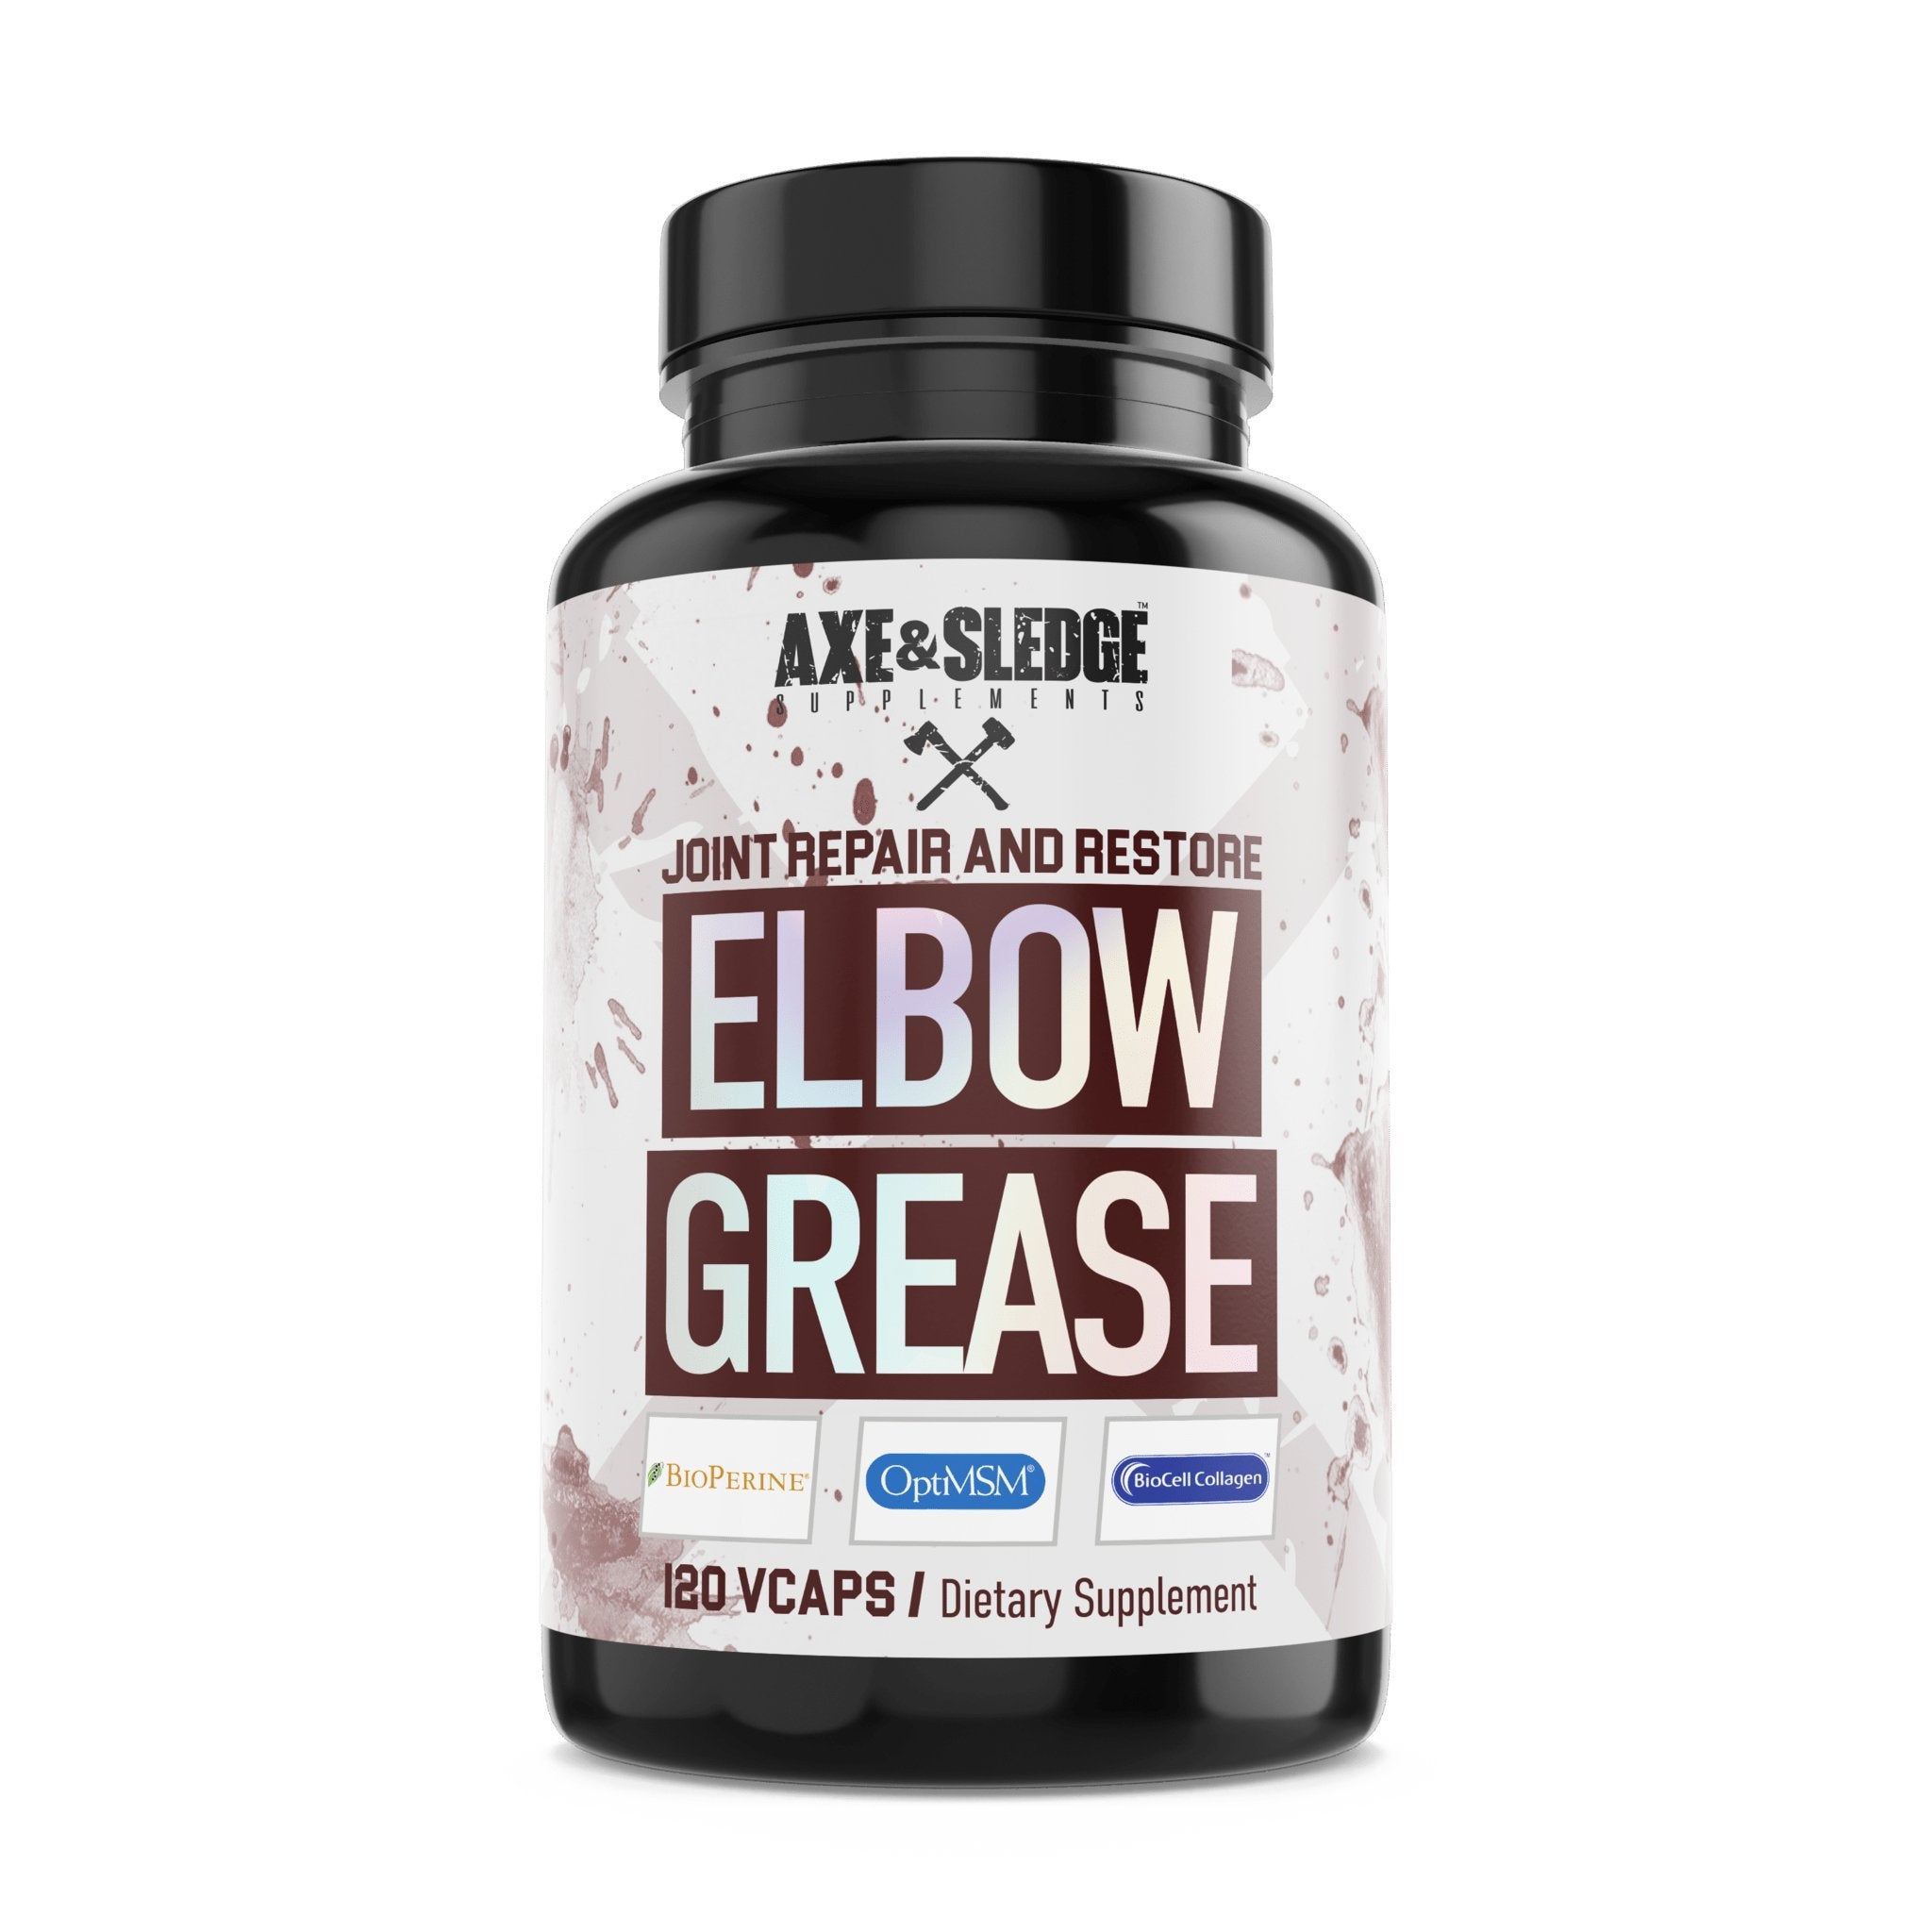 AXE & SLEDGEELBOW GREASEJoint SupportRED SUPPS